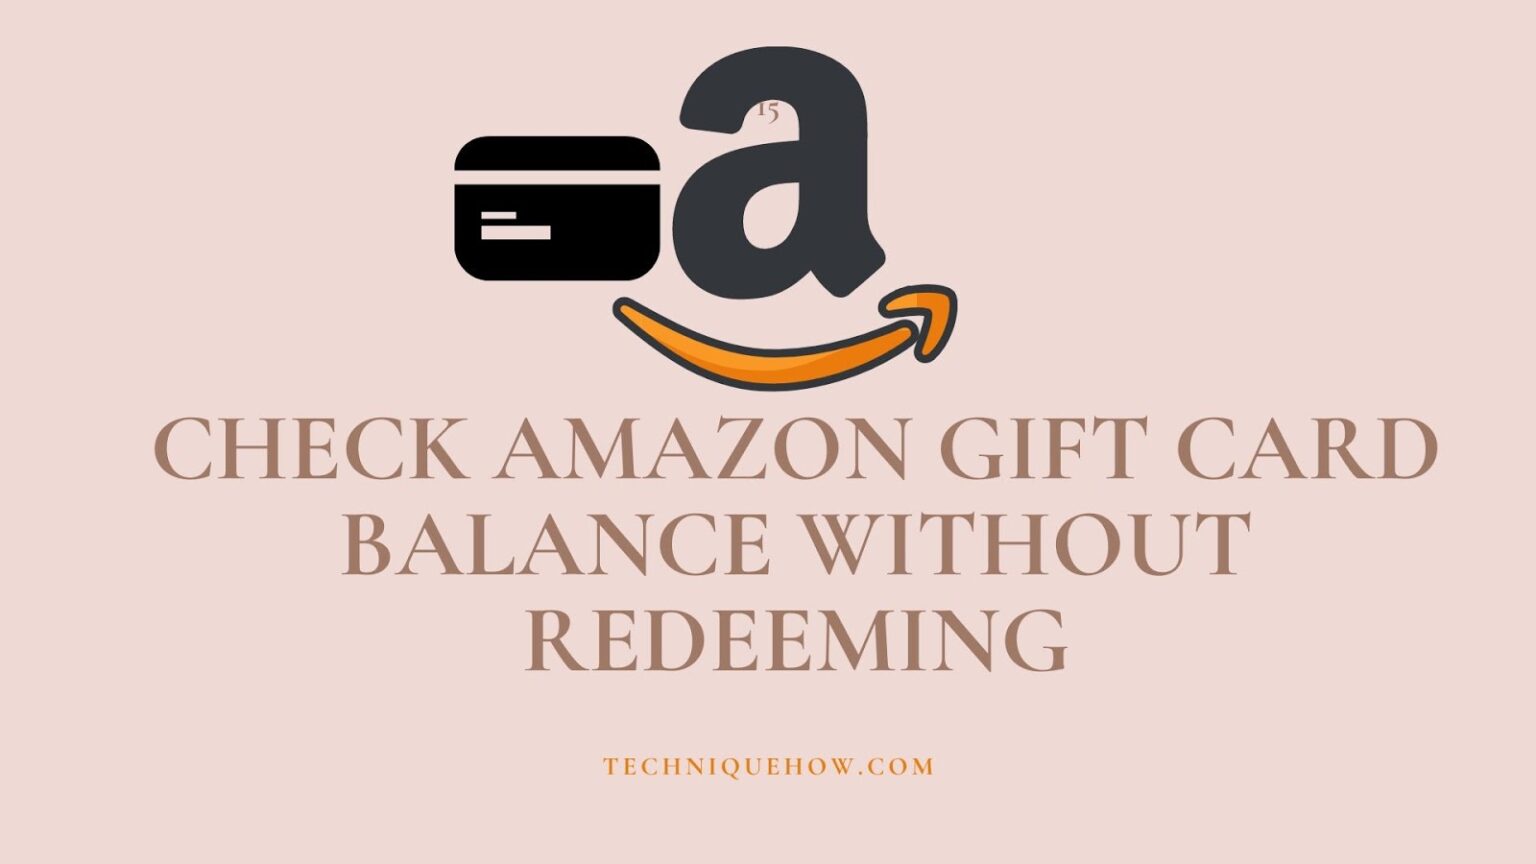 Find & Check Amazon gift card Balance without Redeeming